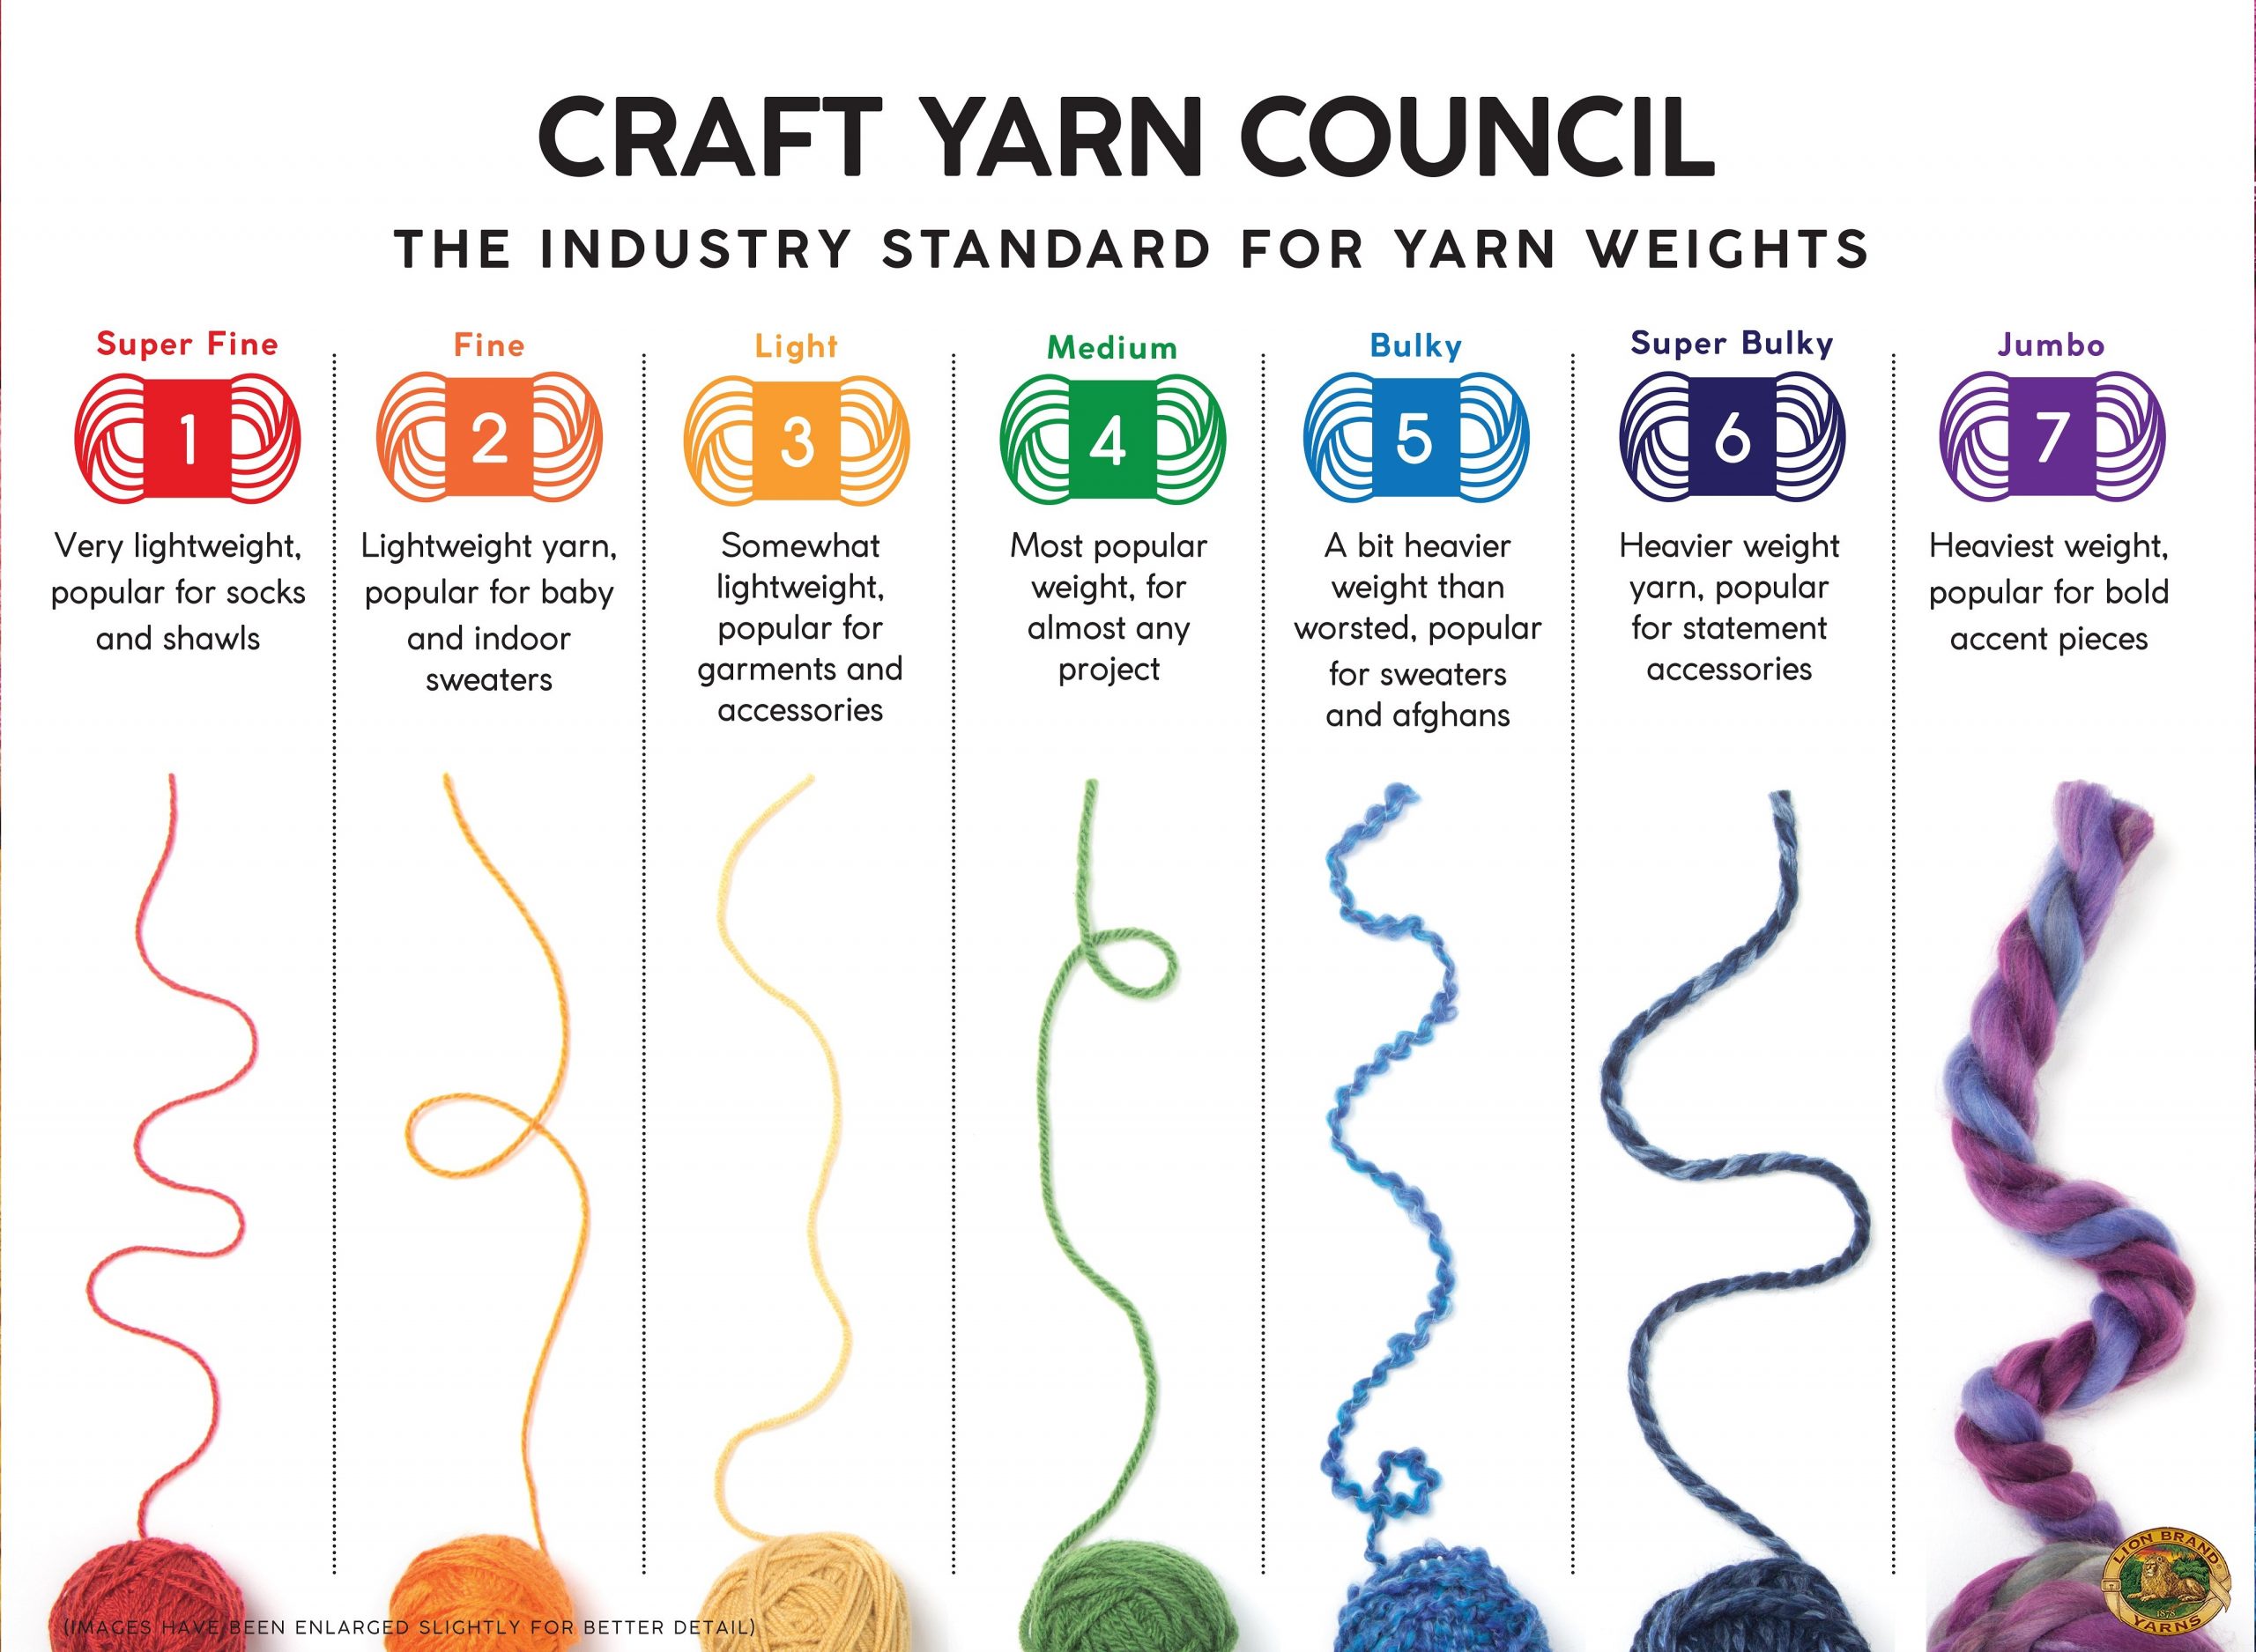 How Much Yarn Do You Need? I Love Yarn Forever